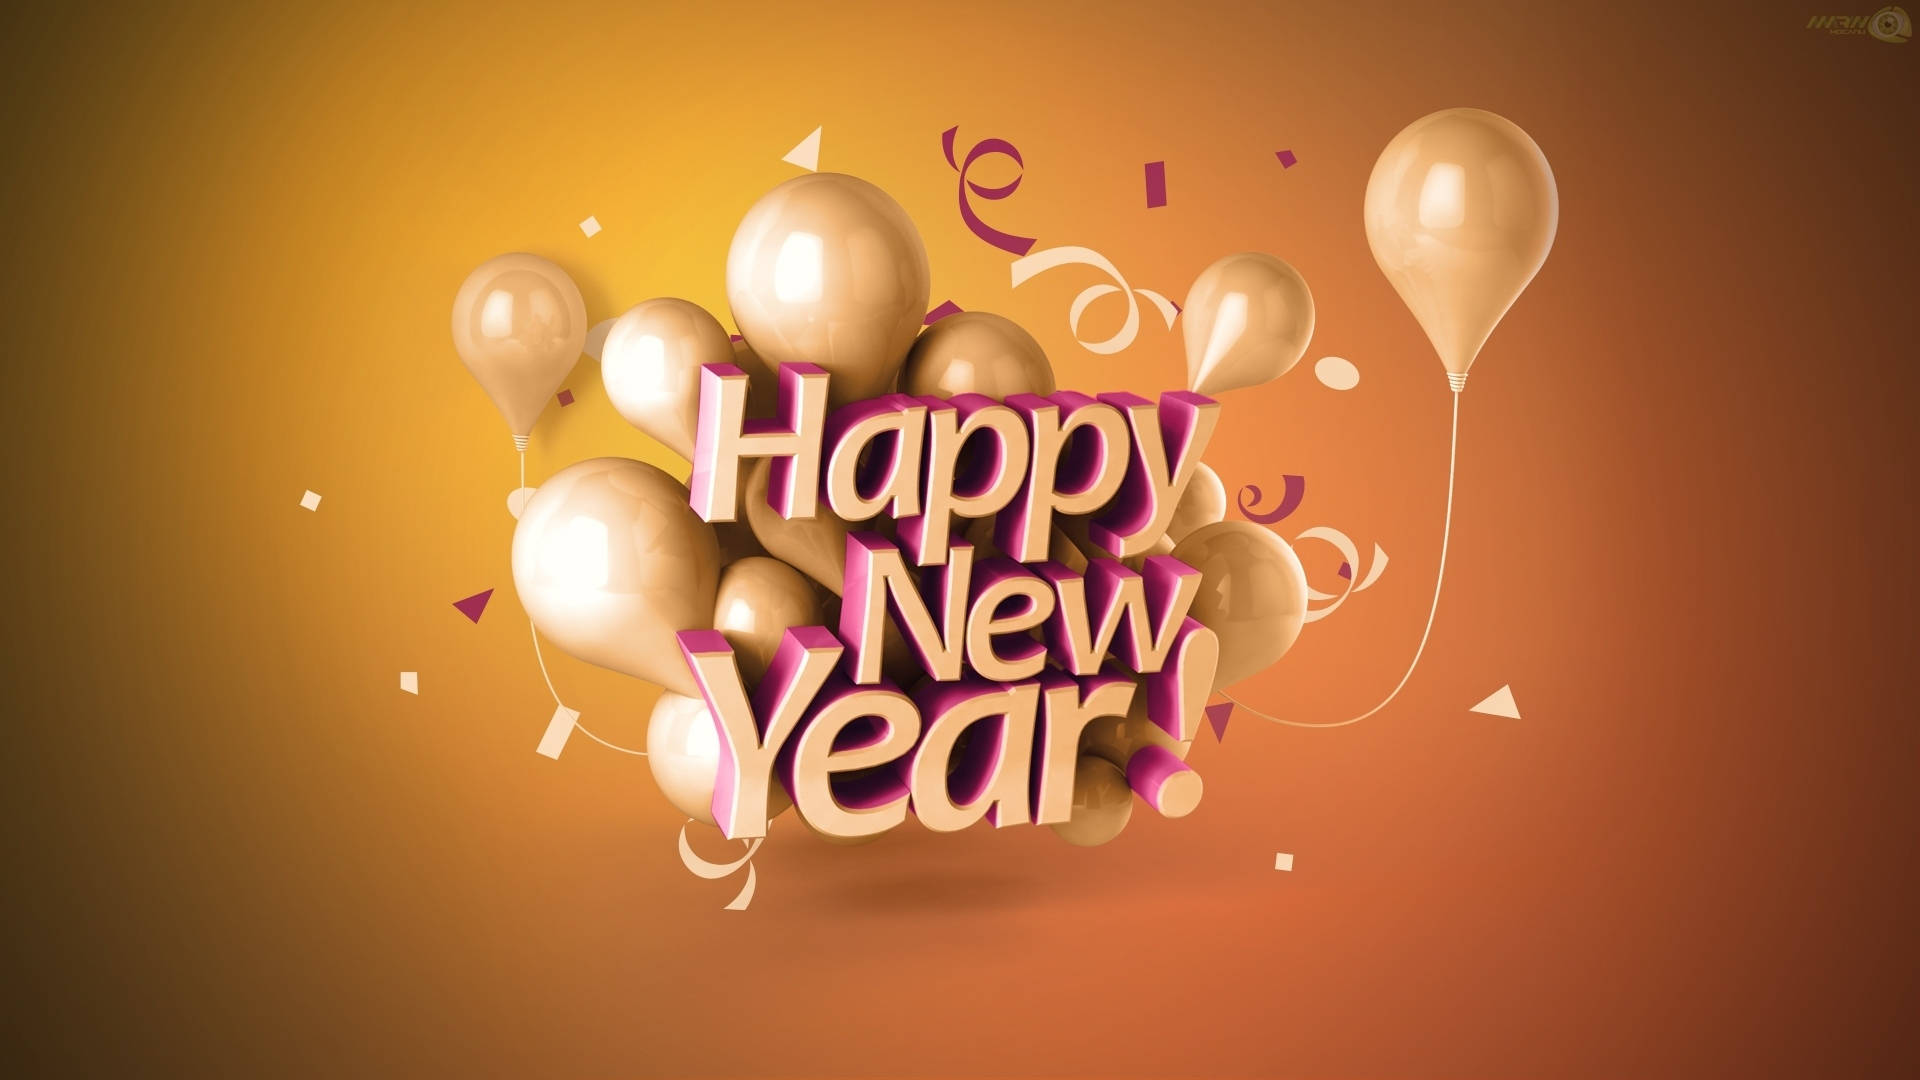 Gold Balloons New Year Greetings Background